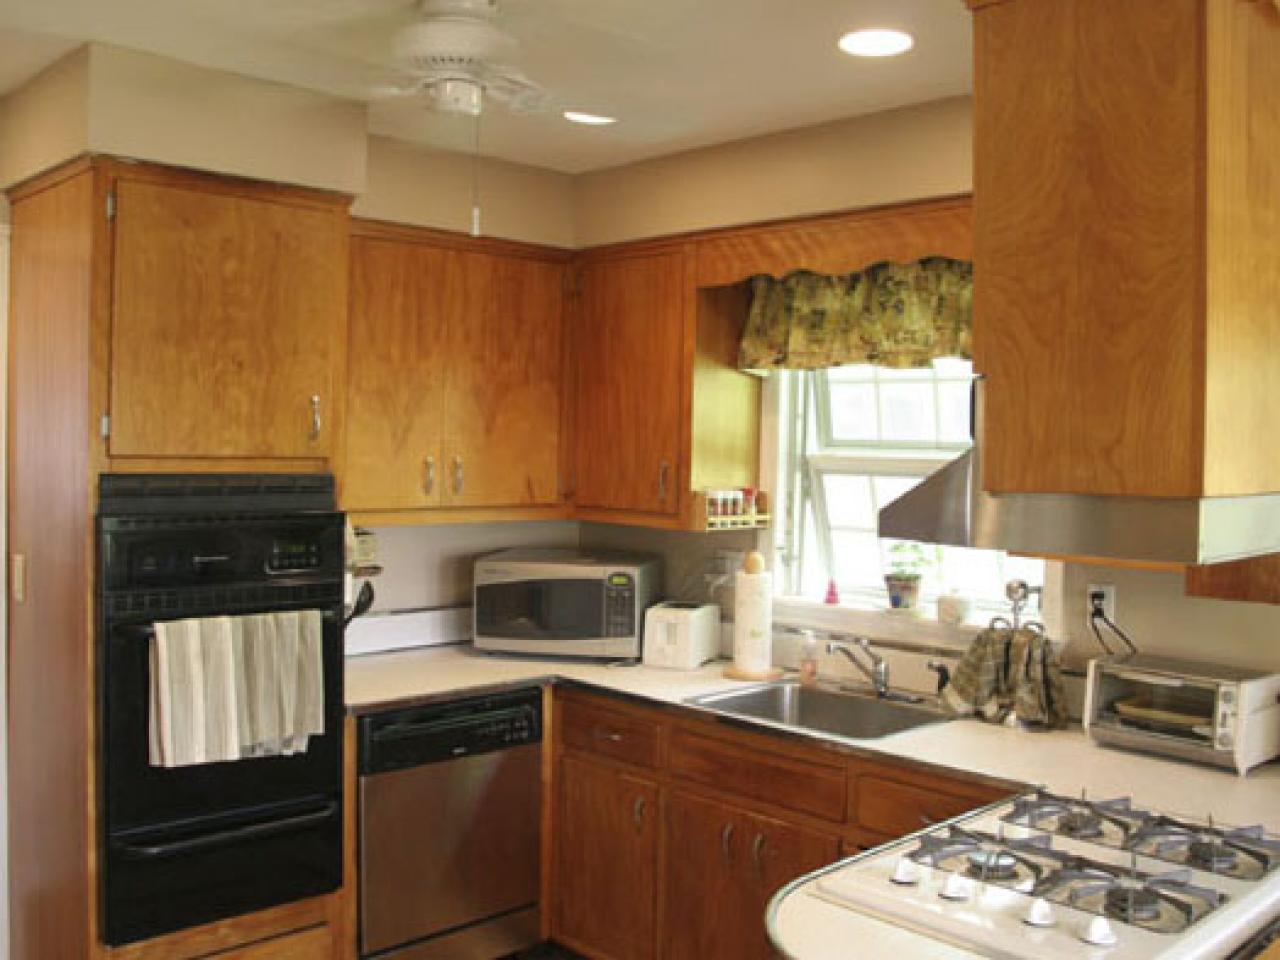 Kitchen Cabinets A Makeover, How To Change Stain Color On Kitchen Cabinets